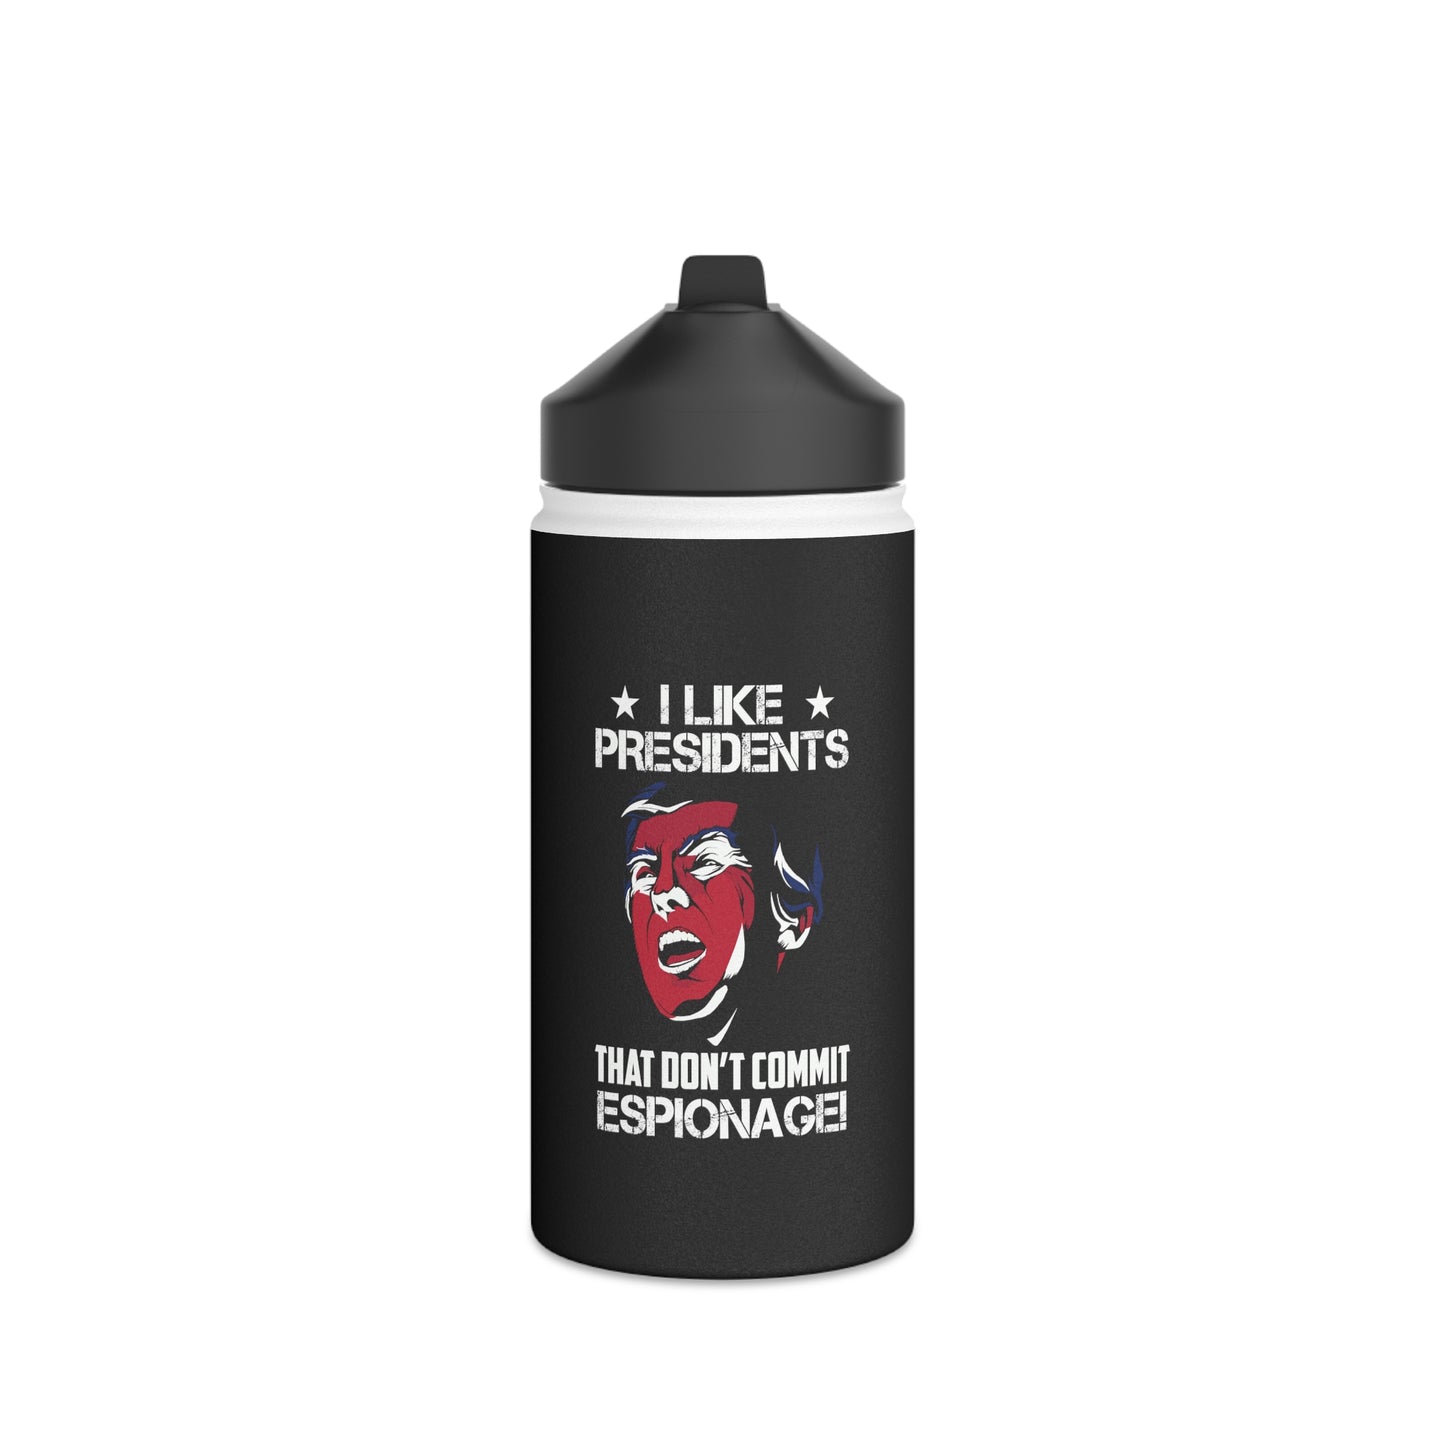 I LIKE PRESIDENTS THAT DON'T COMMIT ESPIONAGE! - Stainless Steel Water Bottle